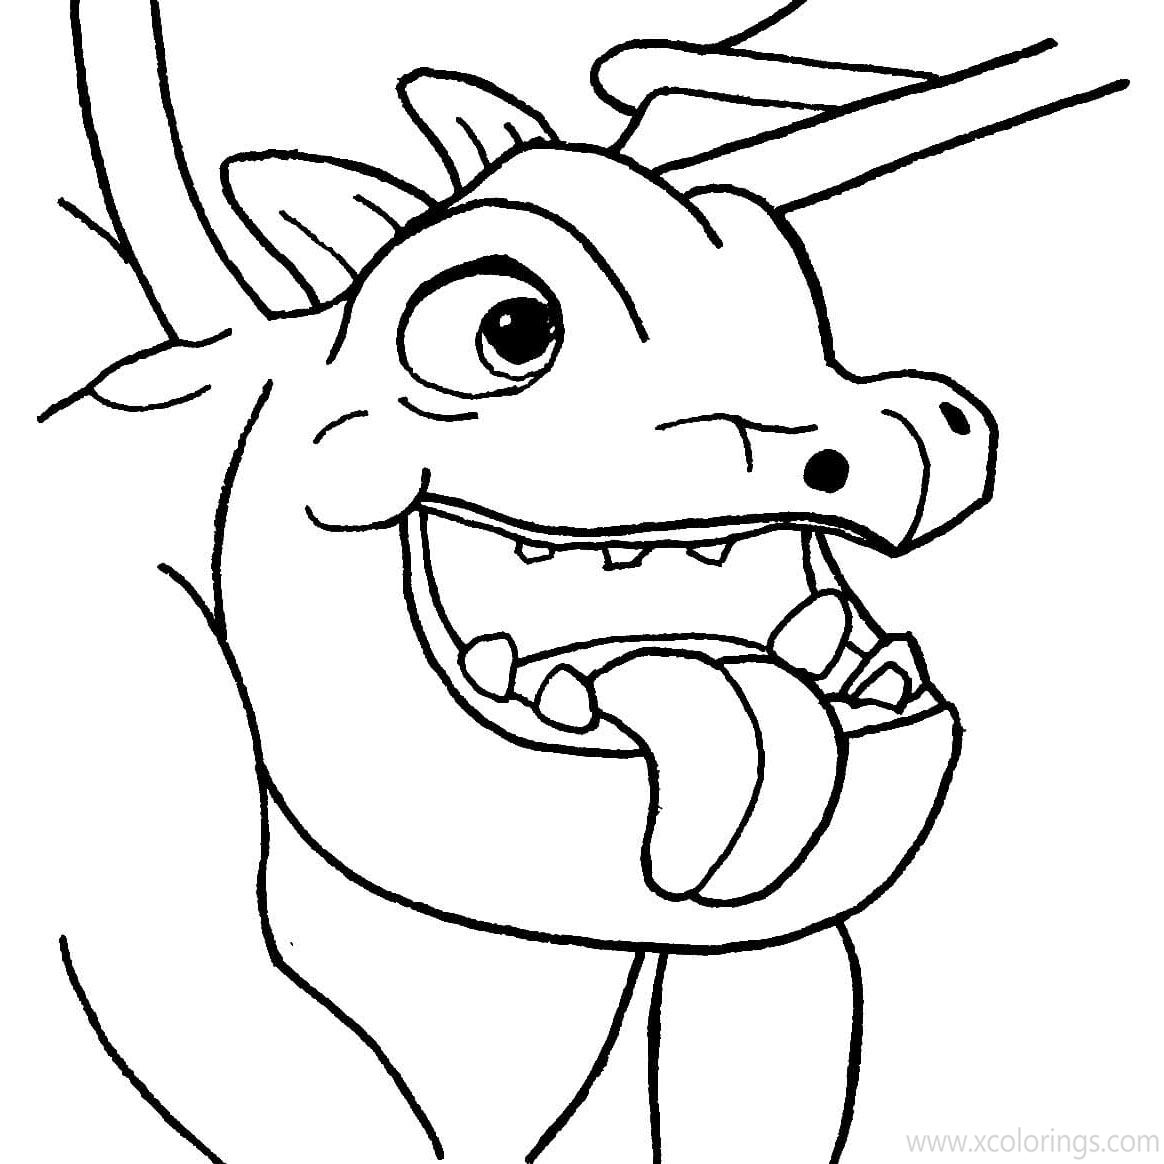 Free Clash Royale Coloring Pages Baby Dragon printable